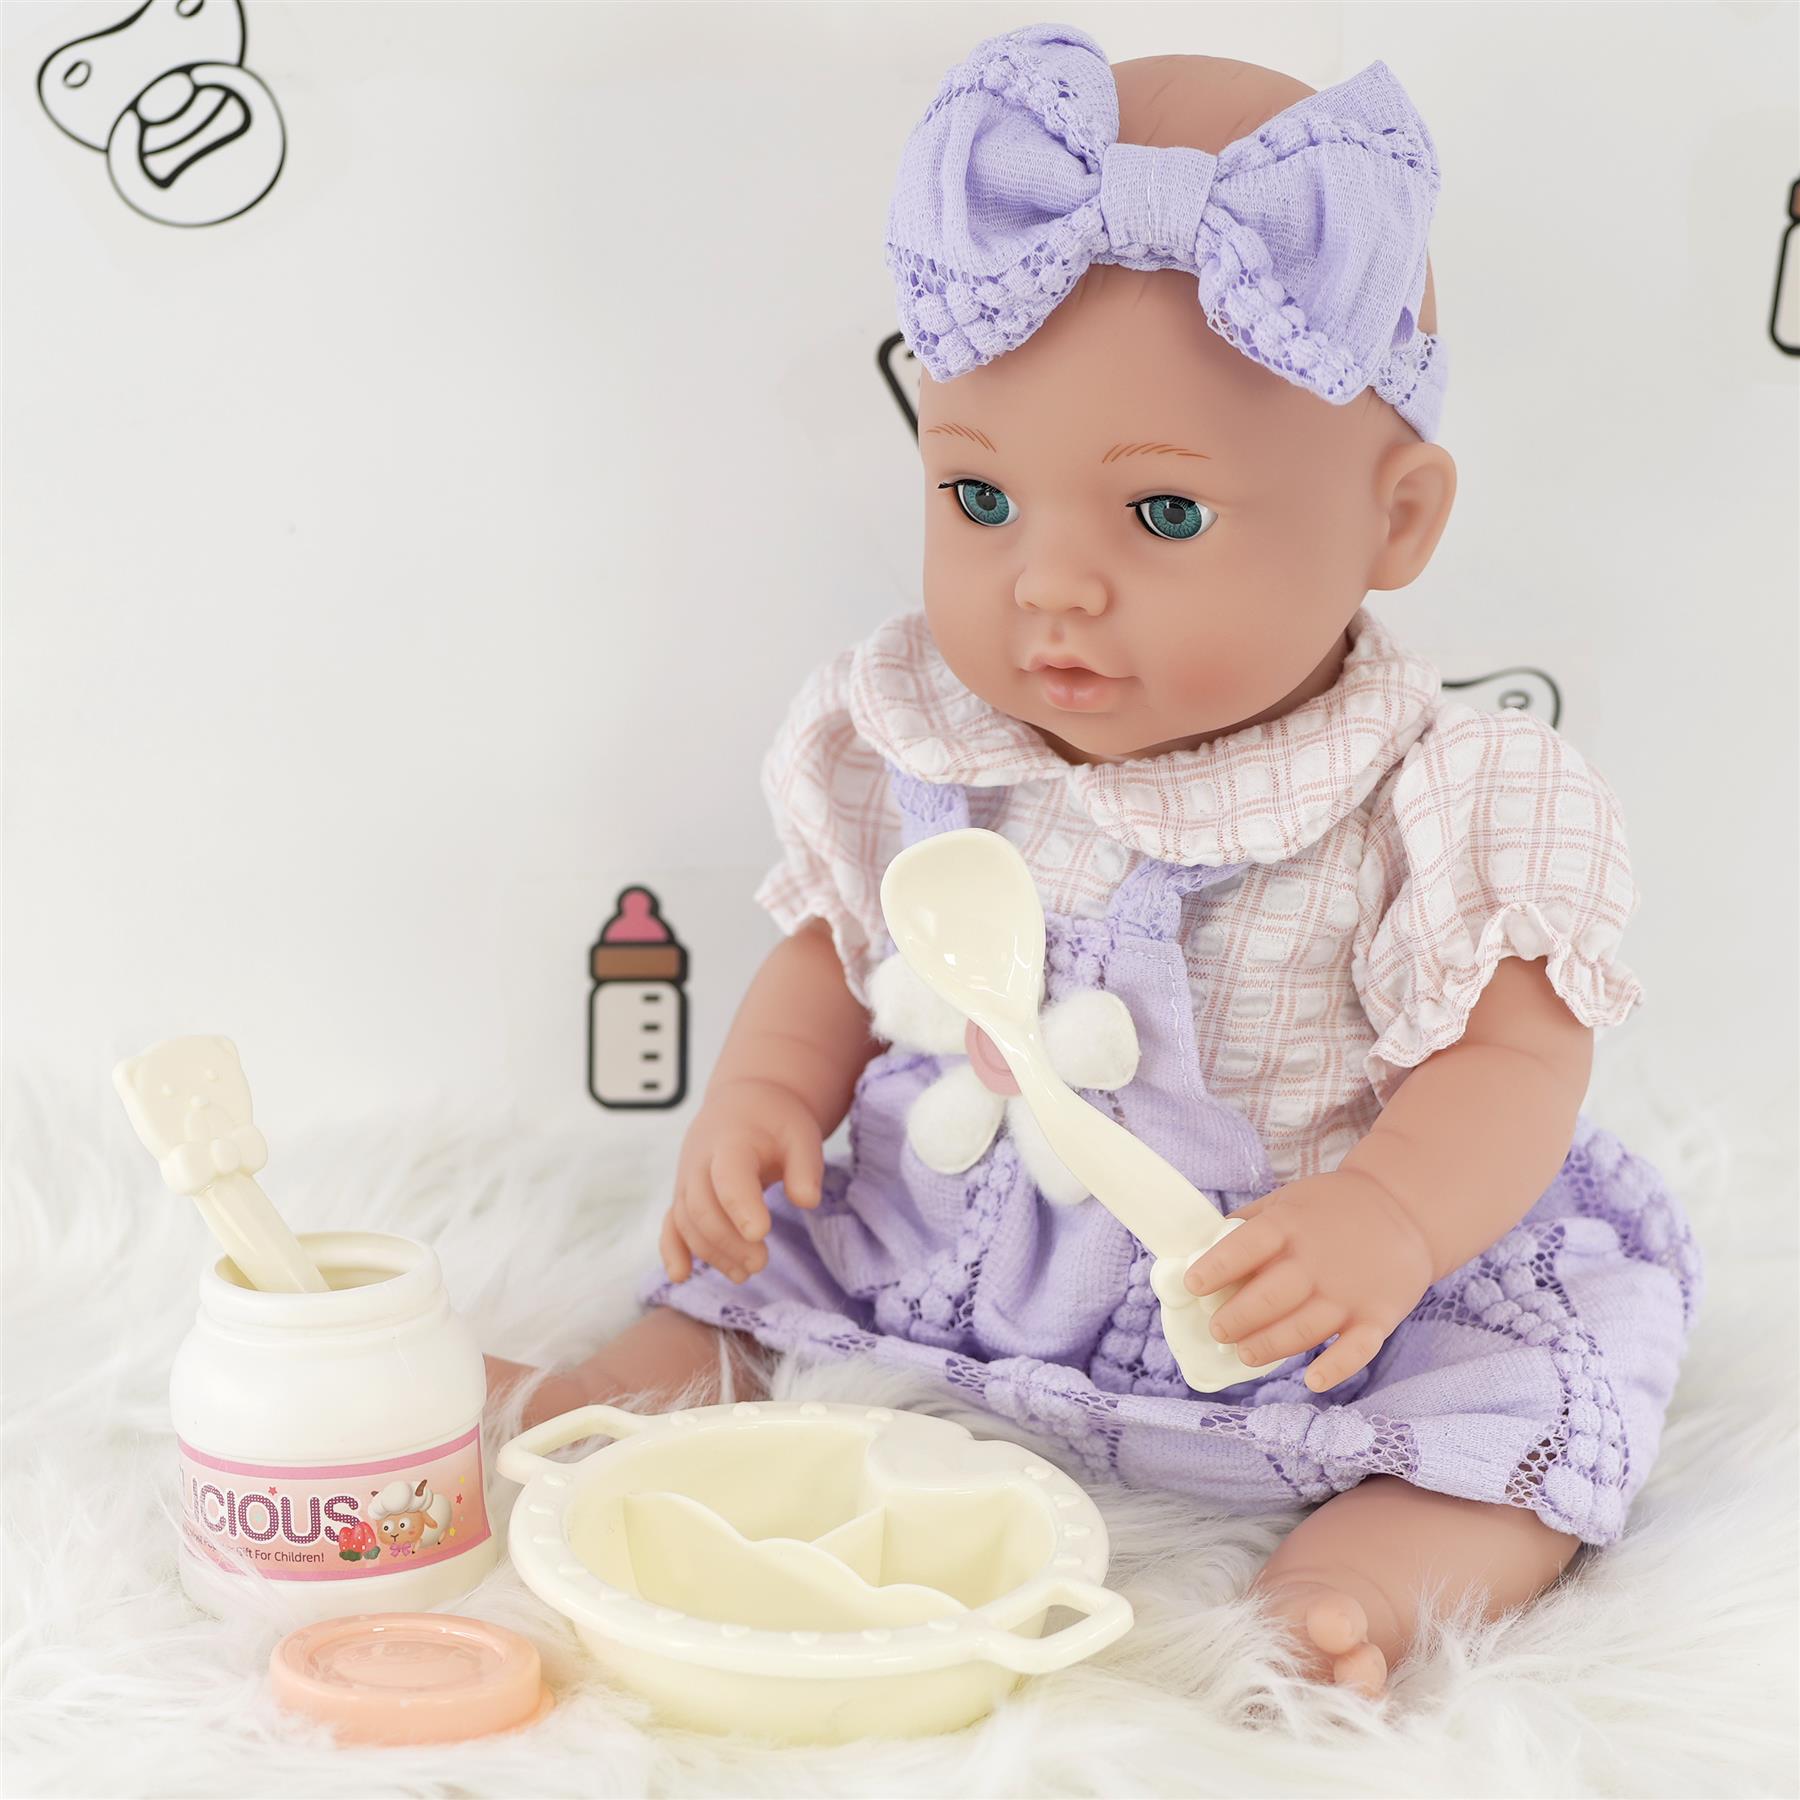 16" Baby Doll with Accessories by BiBi Doll - UKBuyZone